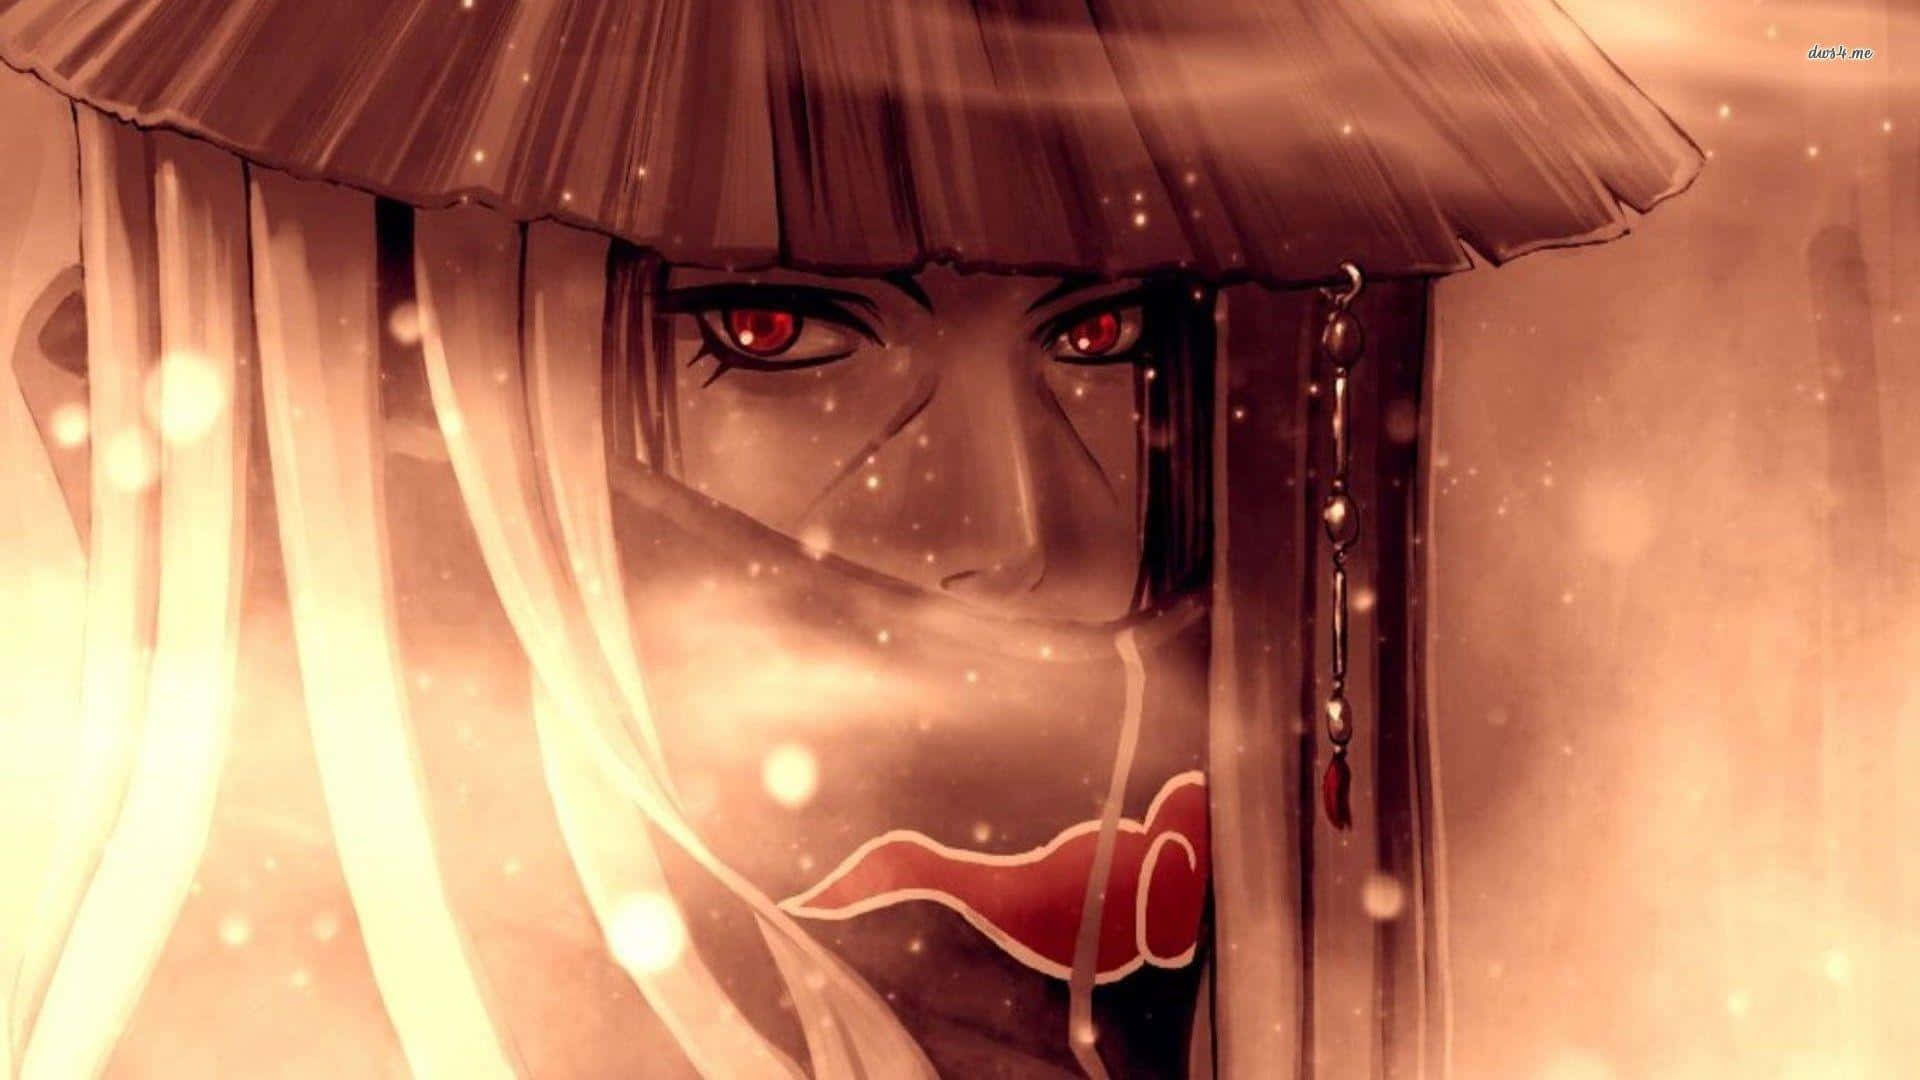 Itachi Aesthetic With Sharingan Eyes Wearing Conical Straw Hat With Gold Effect Wallpaper